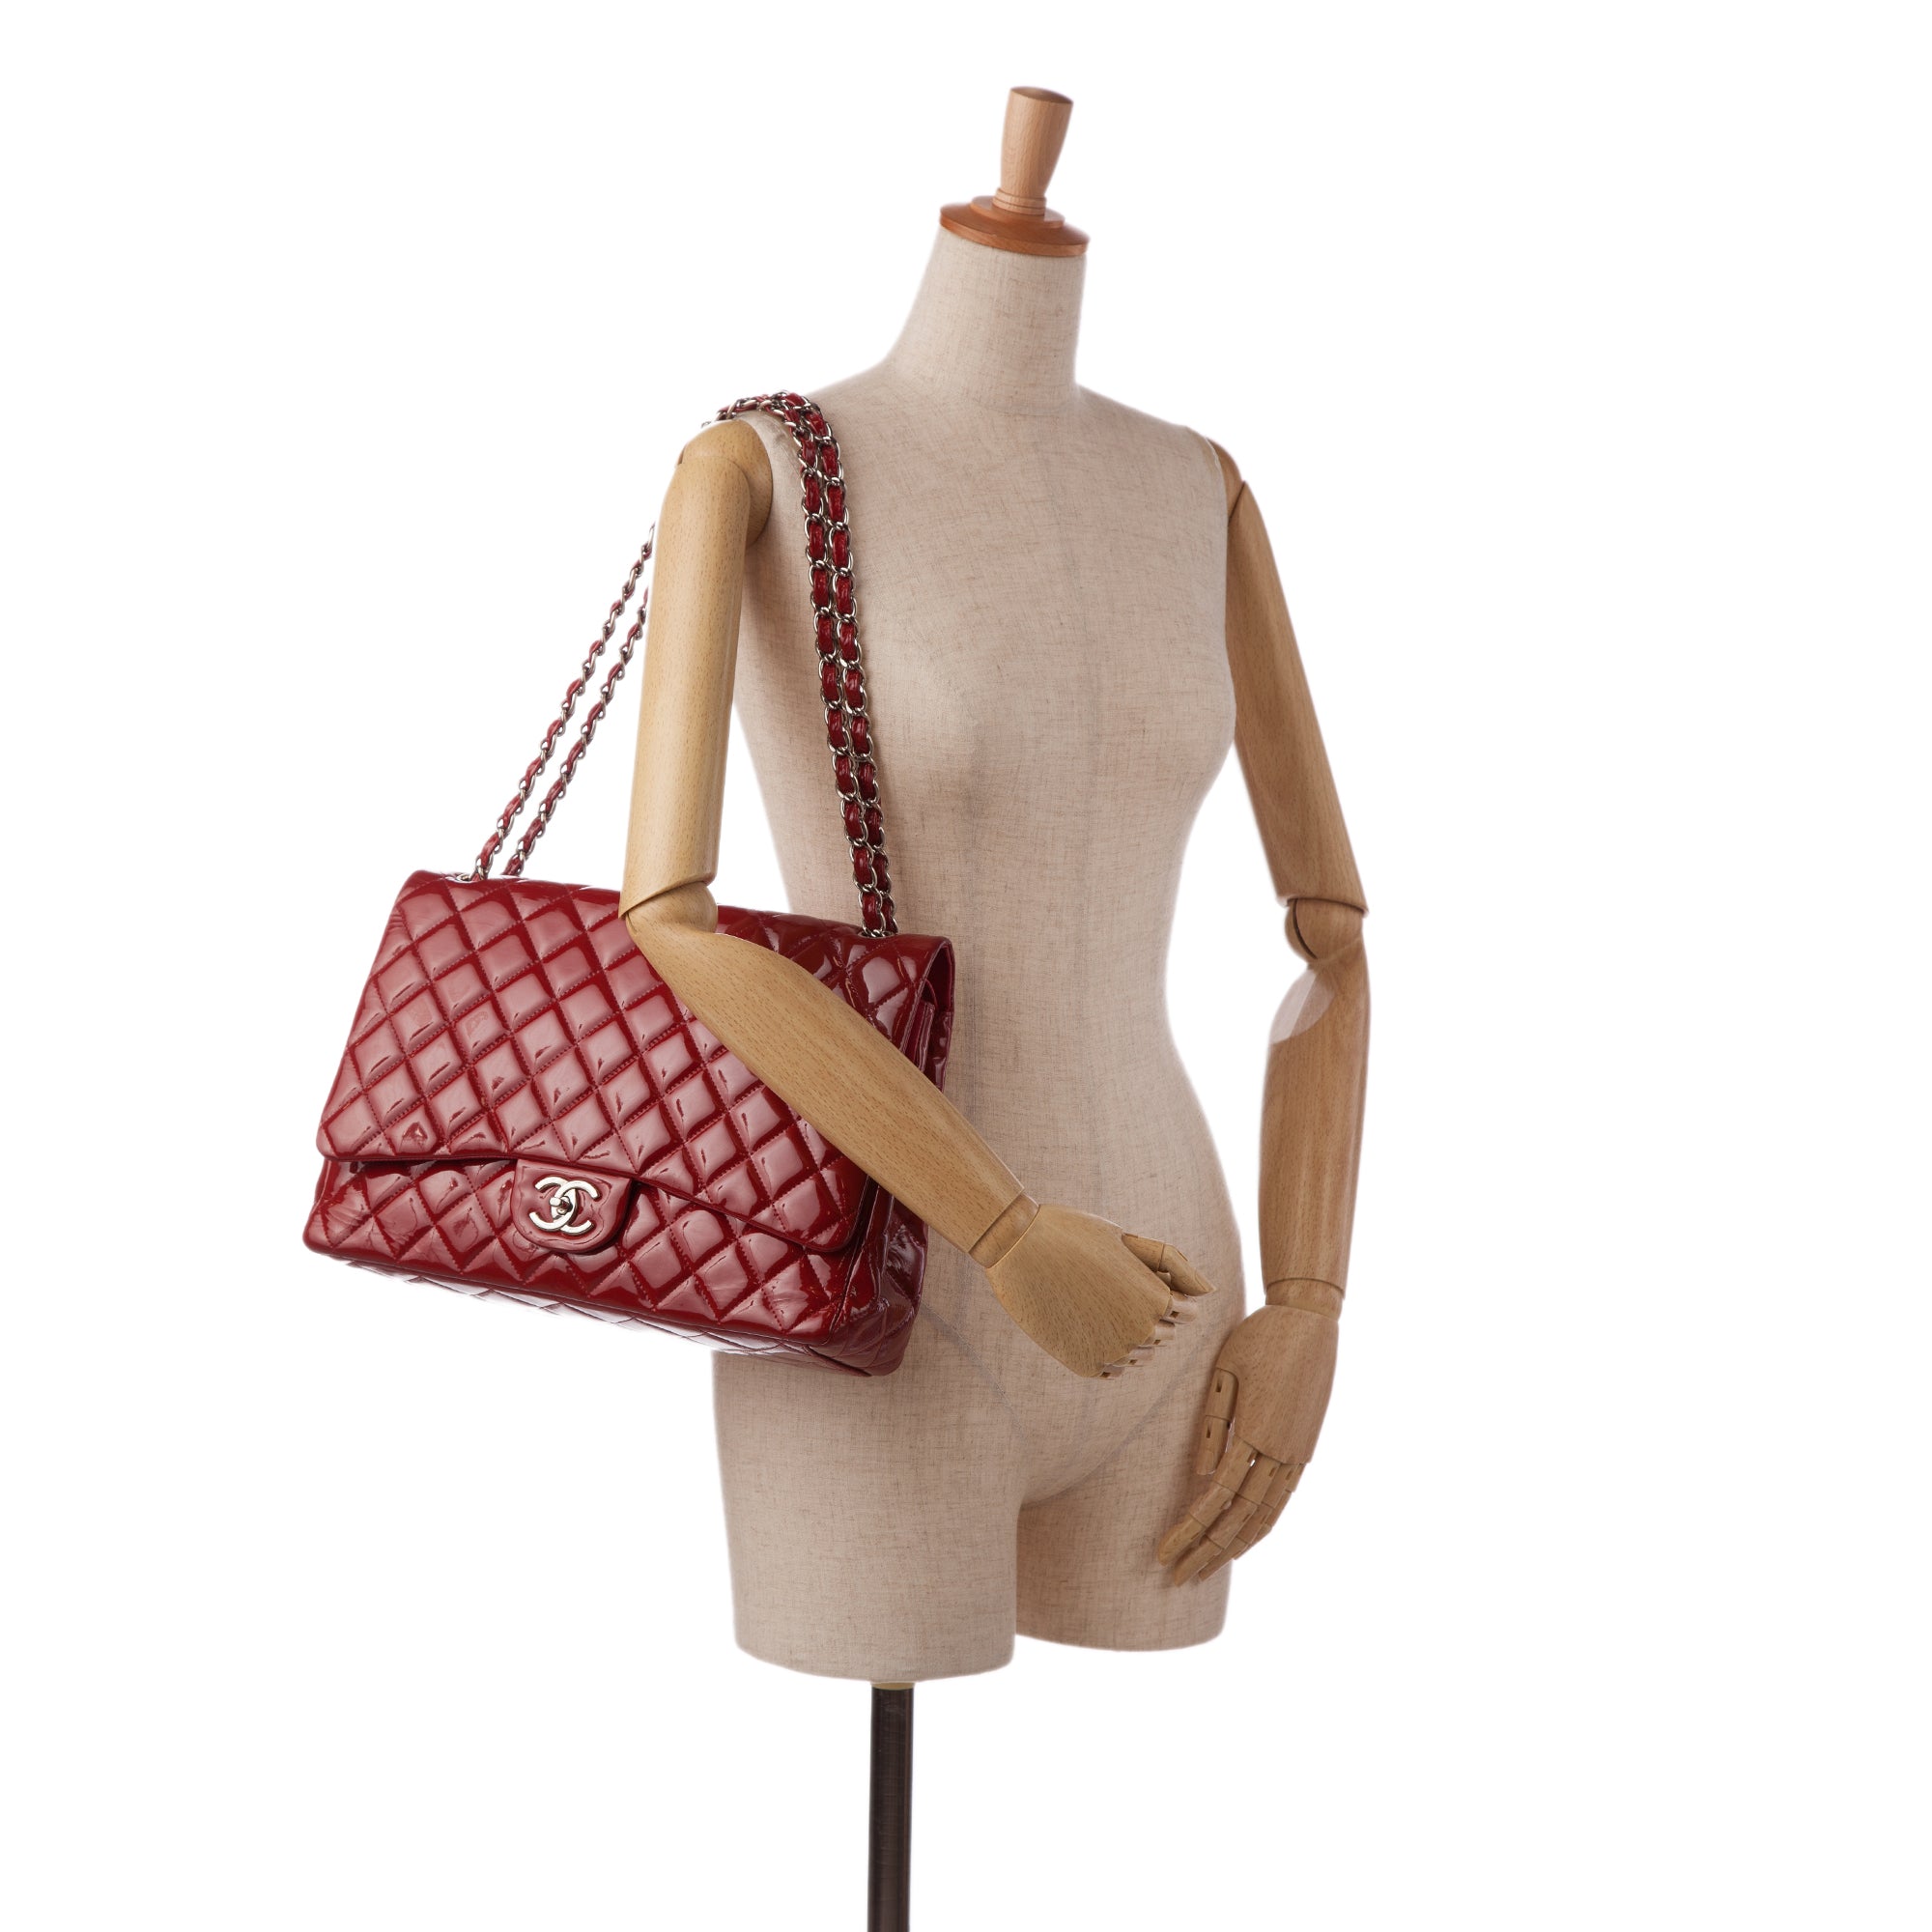 Chanel Straw Bird Bag  Red Chanel Maxi Classic Patent Leather